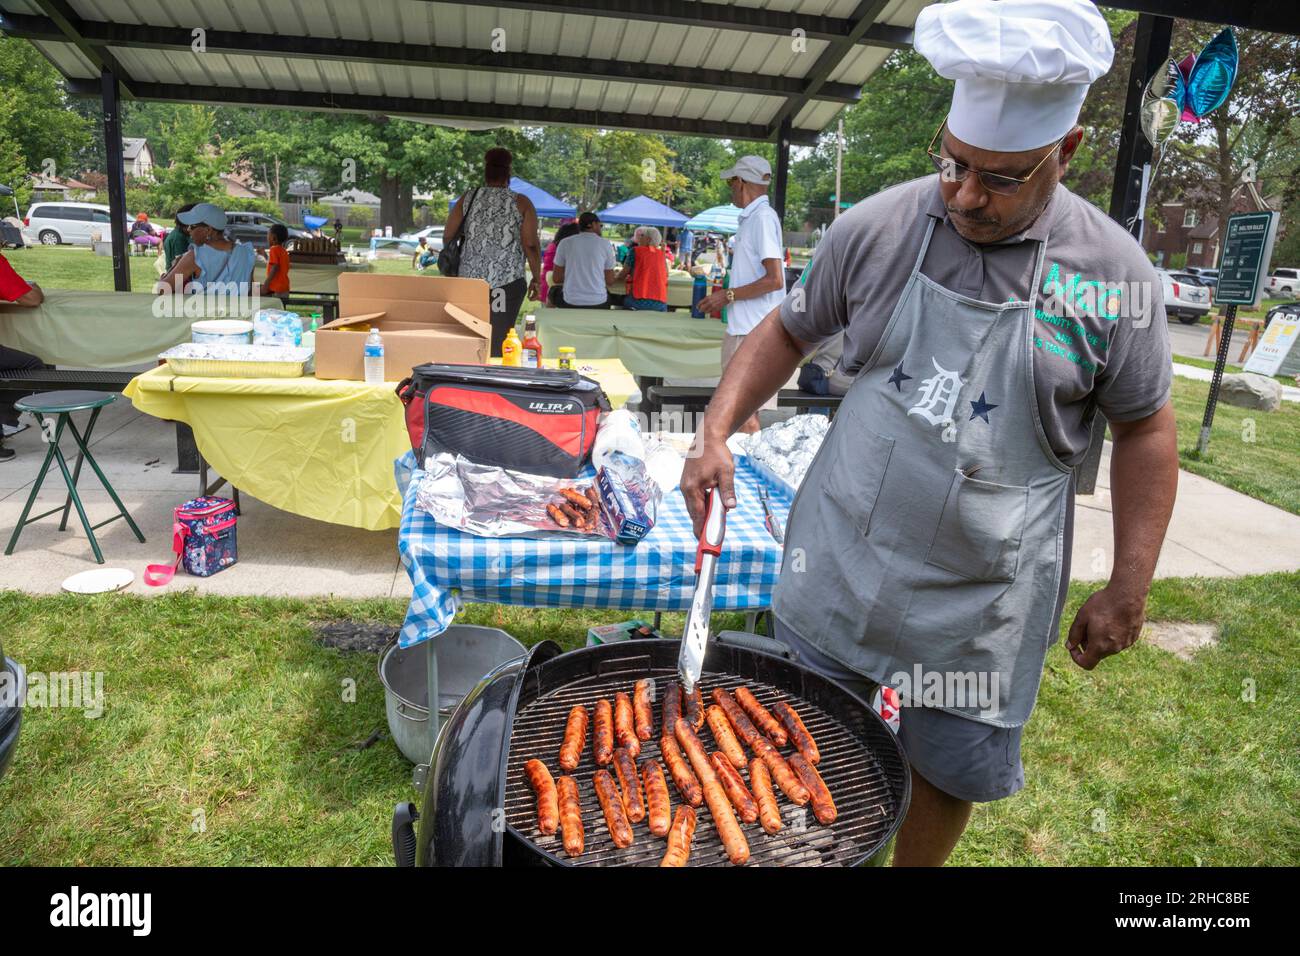 Detroit, Michigan - Adrian Green grills hot dogs as residents of the Morningside neighborhood hold a picnic/party called the 'Summer Sizzler.' It was Stock Photo